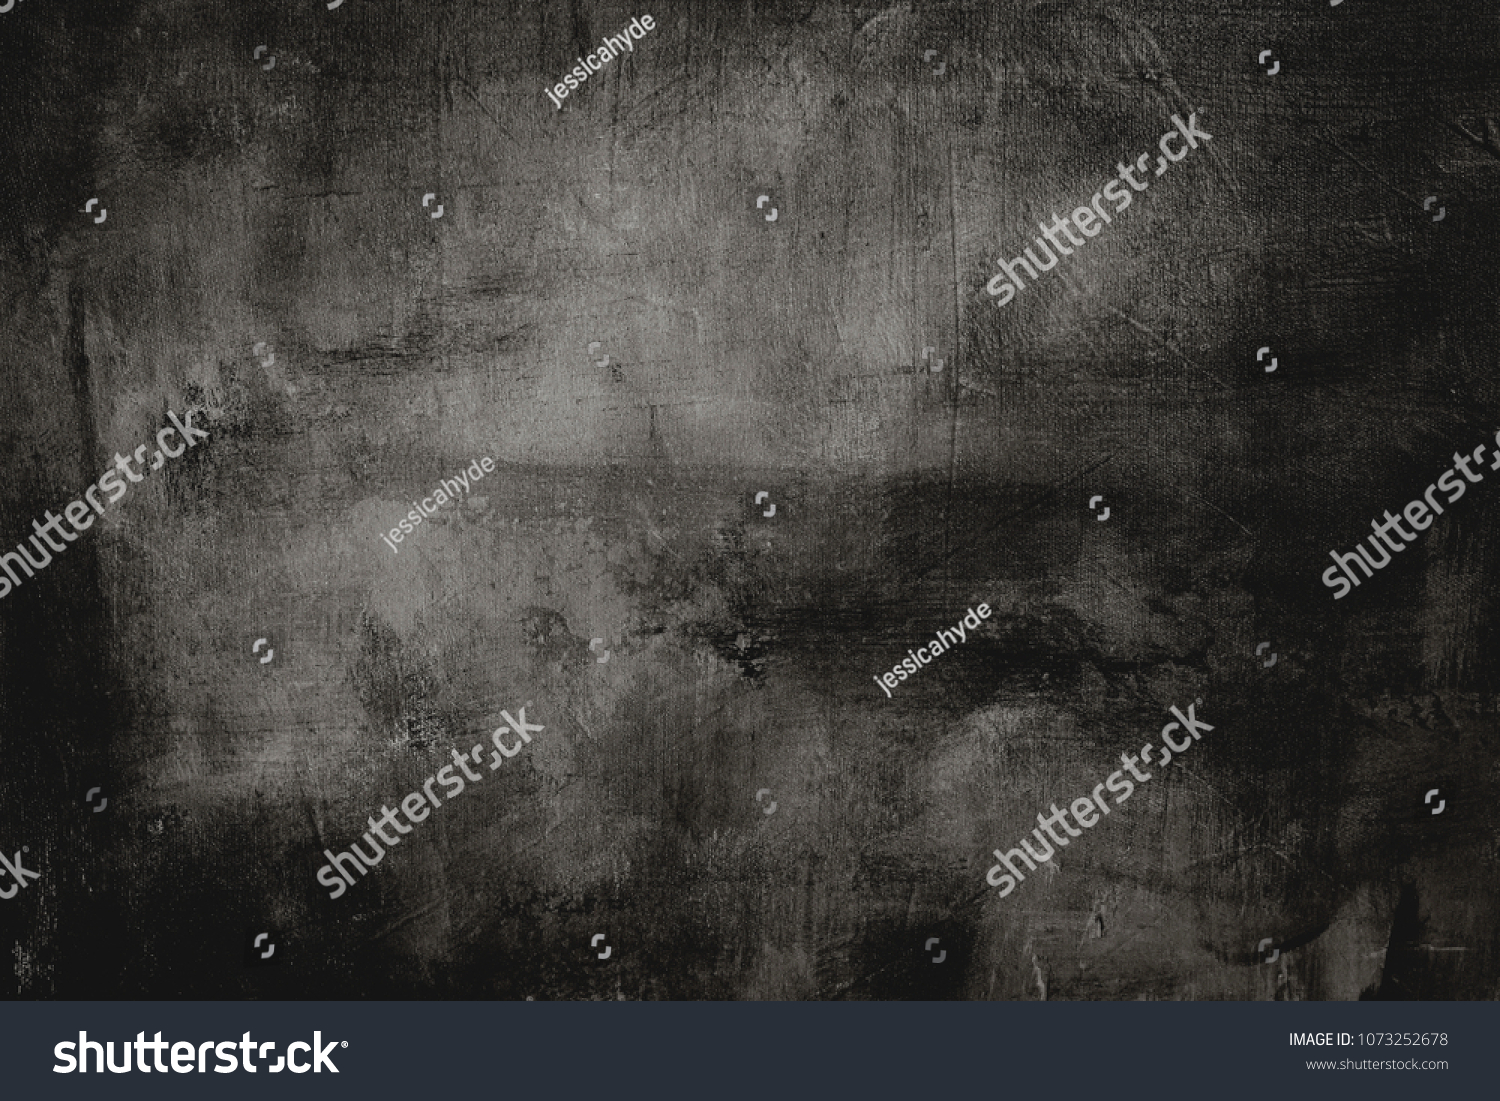 dark gray painting background or texture  #1073252678